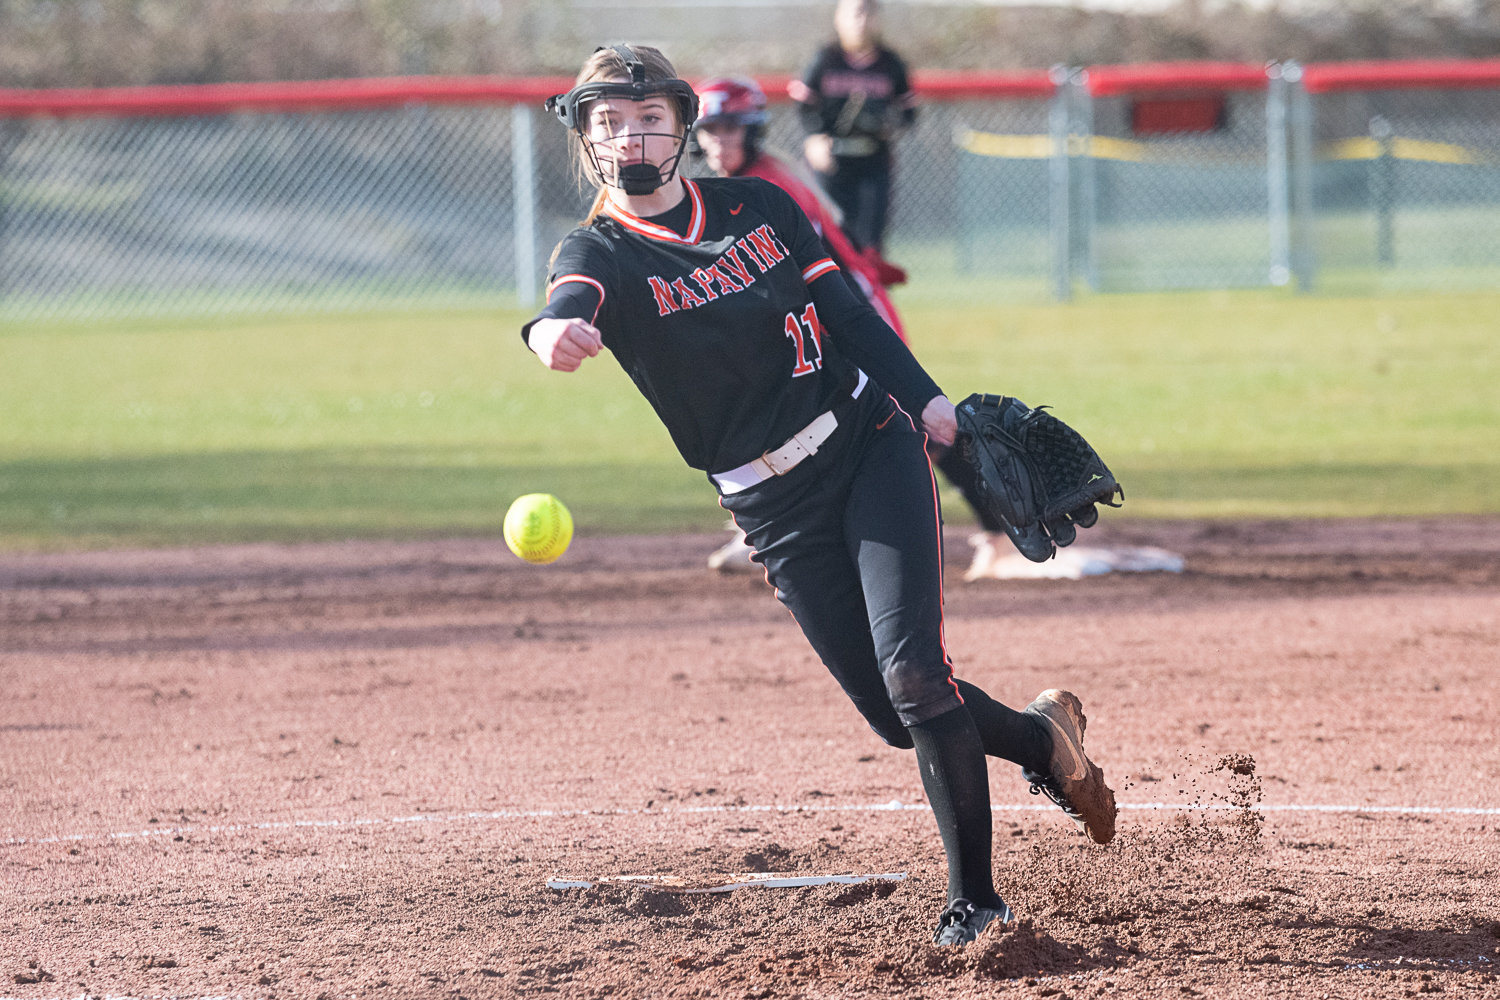 Hannah Fay spins a pitch during Napavine's 27-8 win over Tenino on March 14.